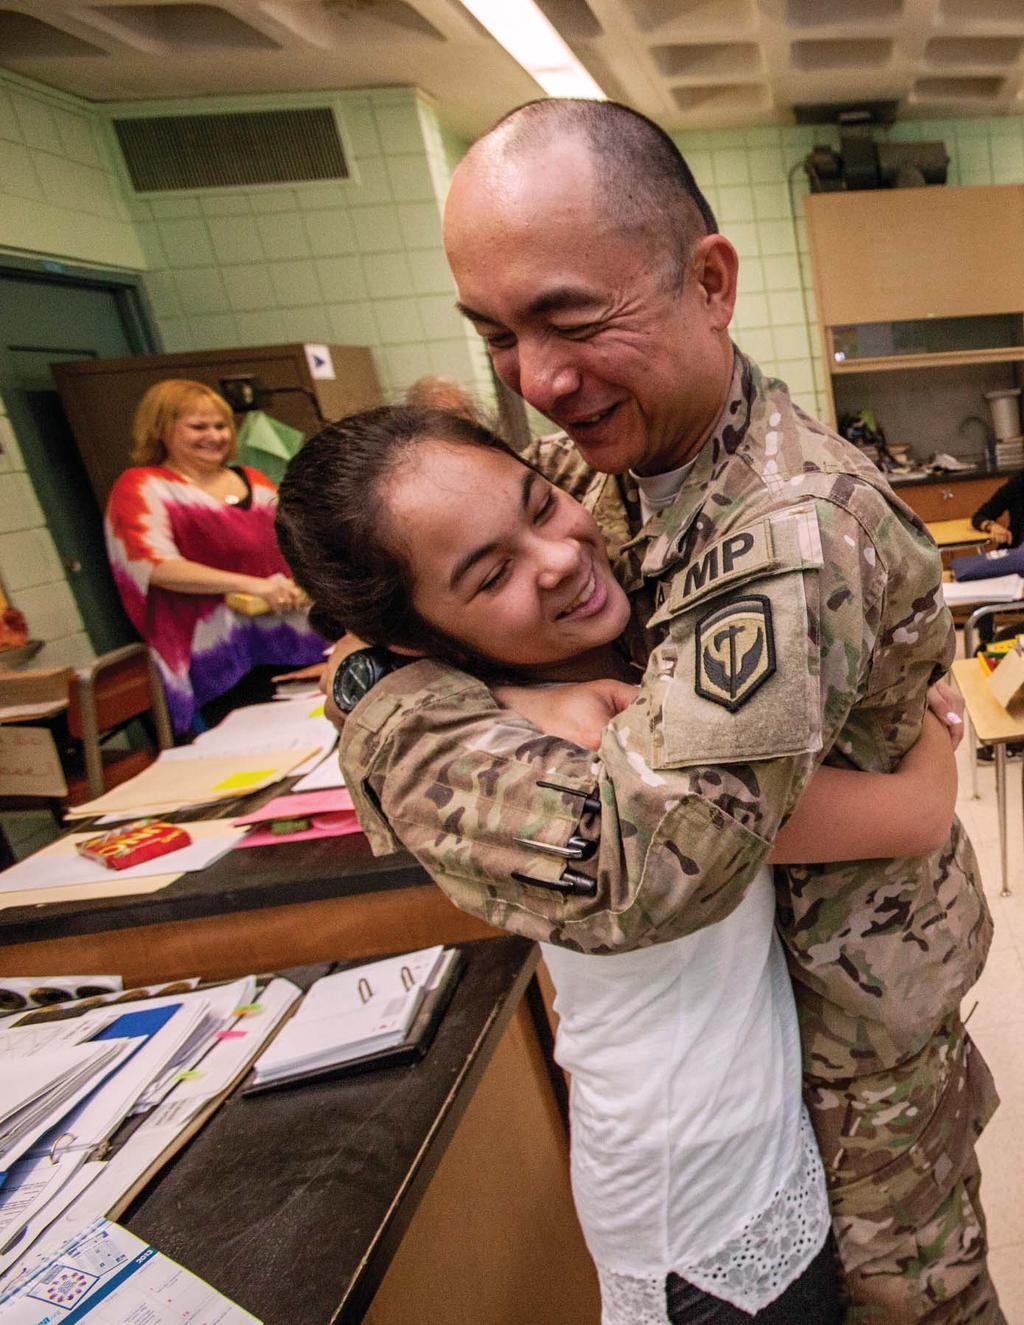 30 1st Sgt. Joseph P.C. Prieto, 508th Military Police Company, surprised his daughter Allison in her sixth grade class in Parlin, N.J., June 7, 2013.